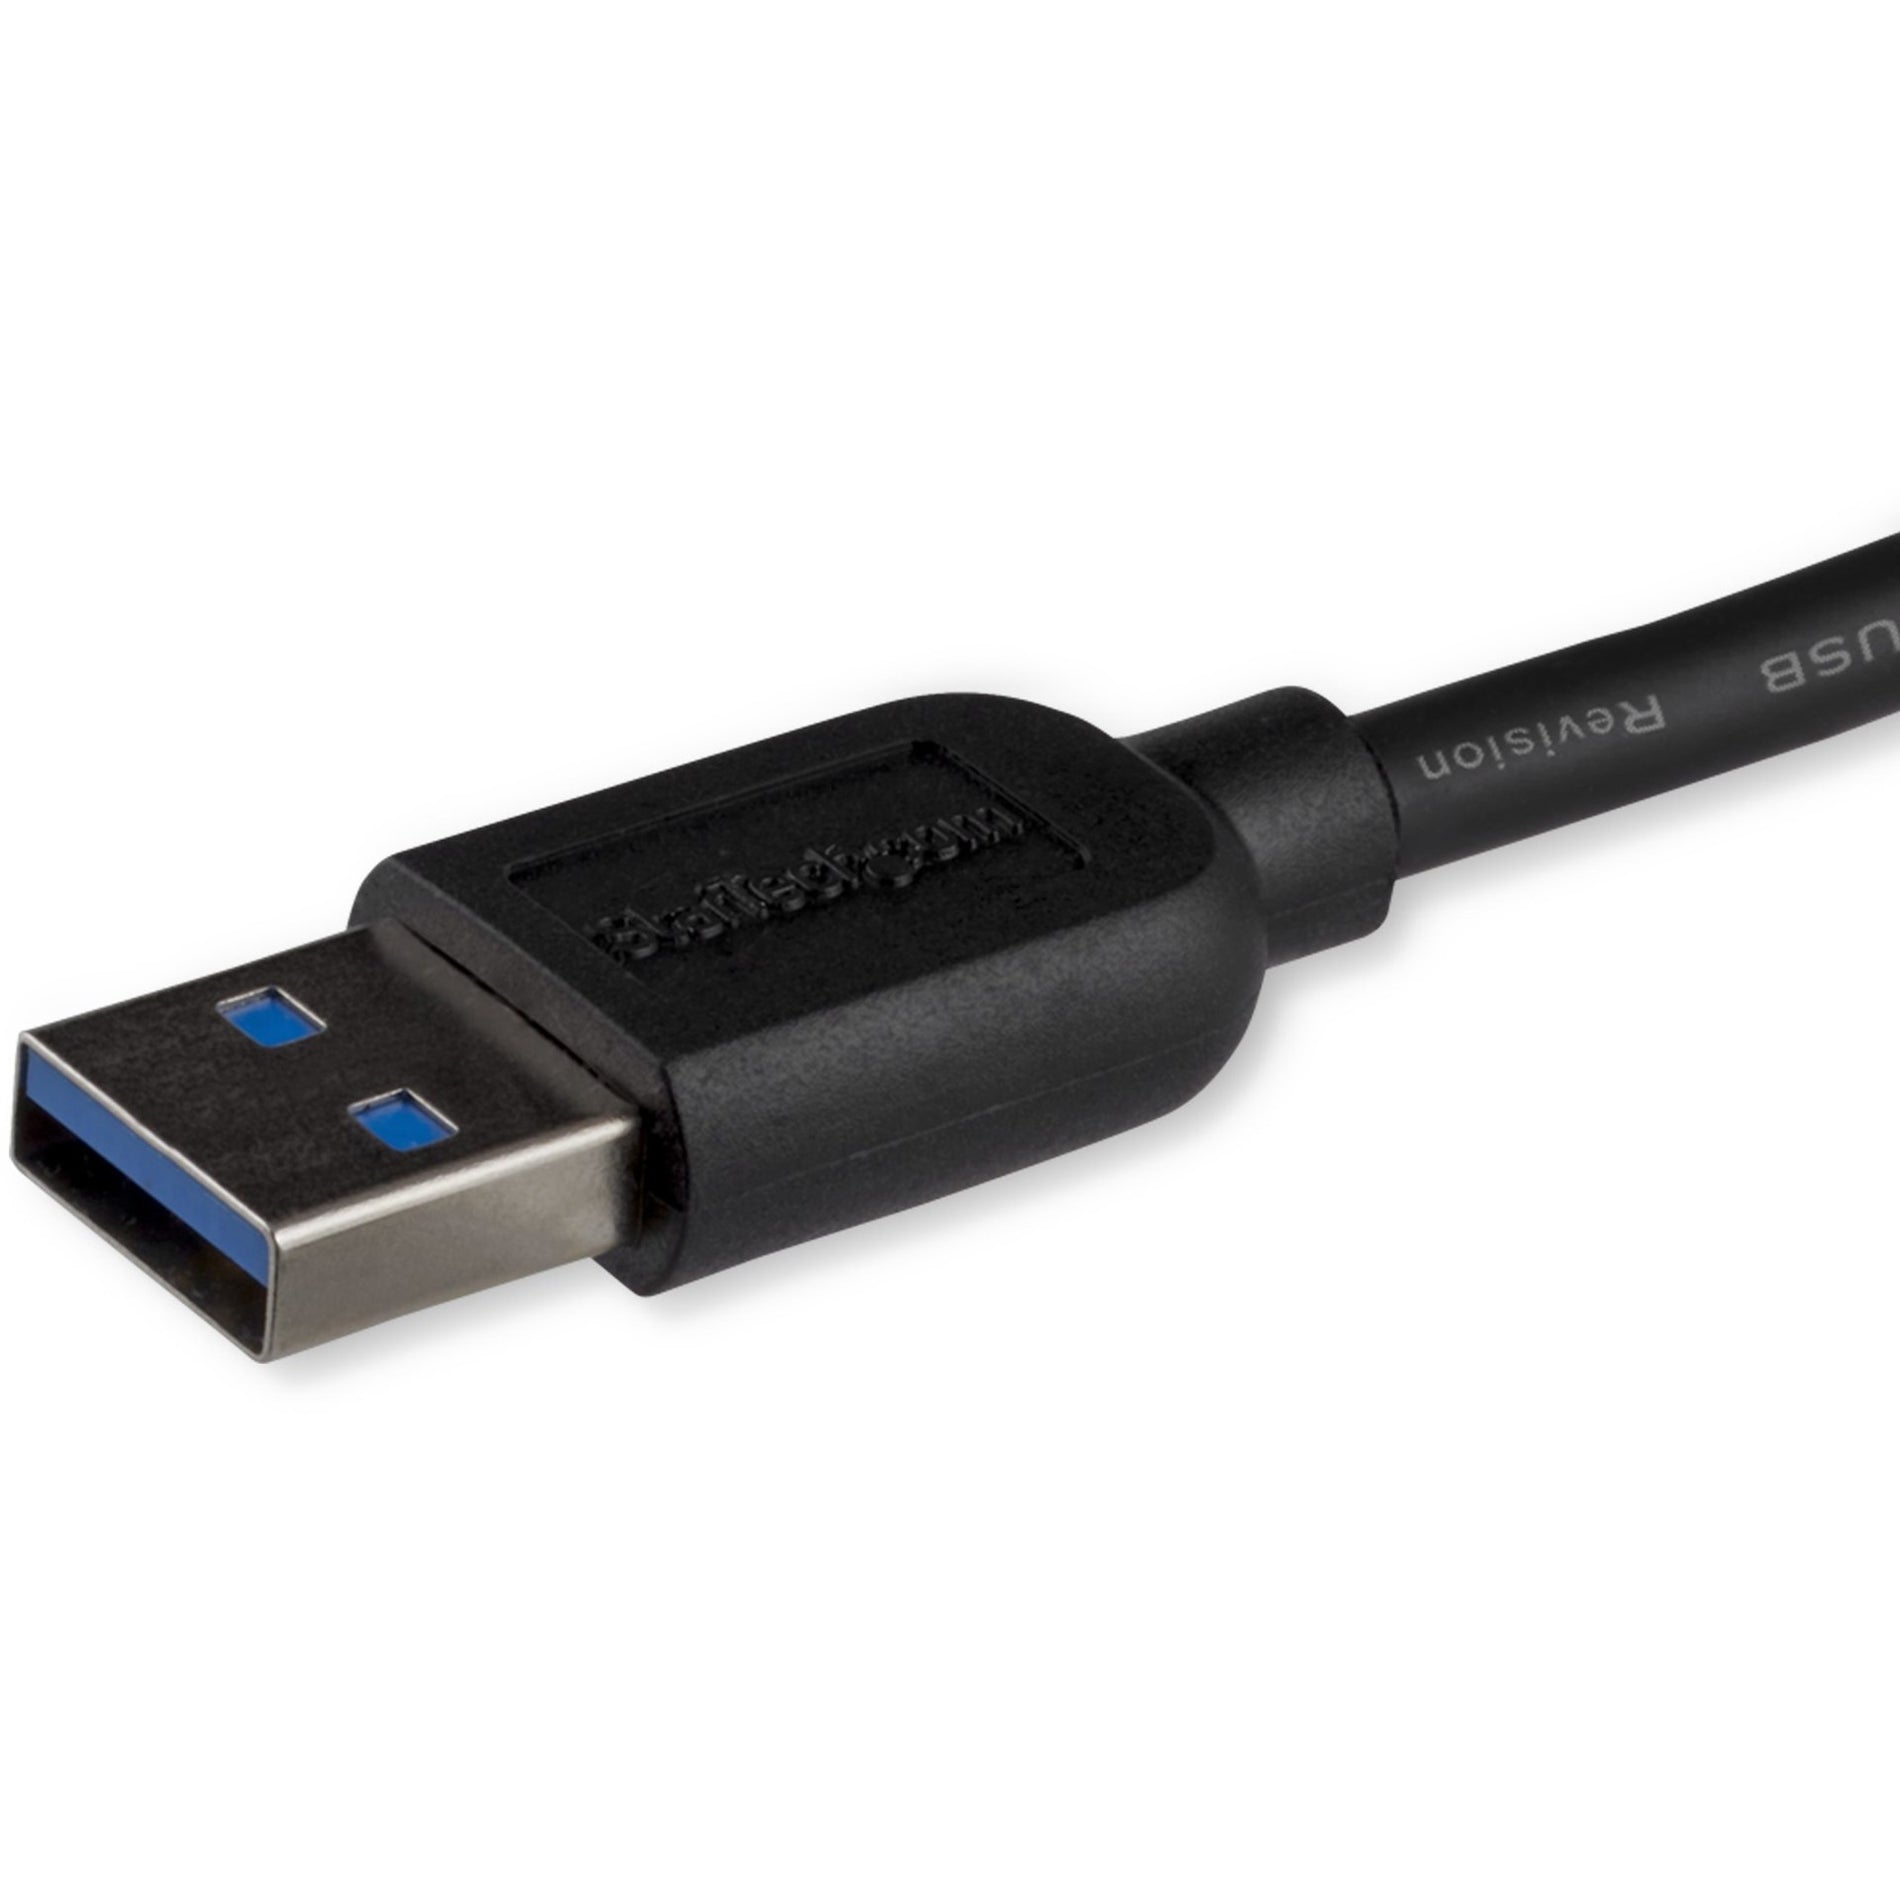 StarTech.com USB3AUB1MS 1m (3ft) Slim SuperSpeed USB 3.0 A to Micro B Cable - M/M, Fast Data Transfer, Flexible and Durable